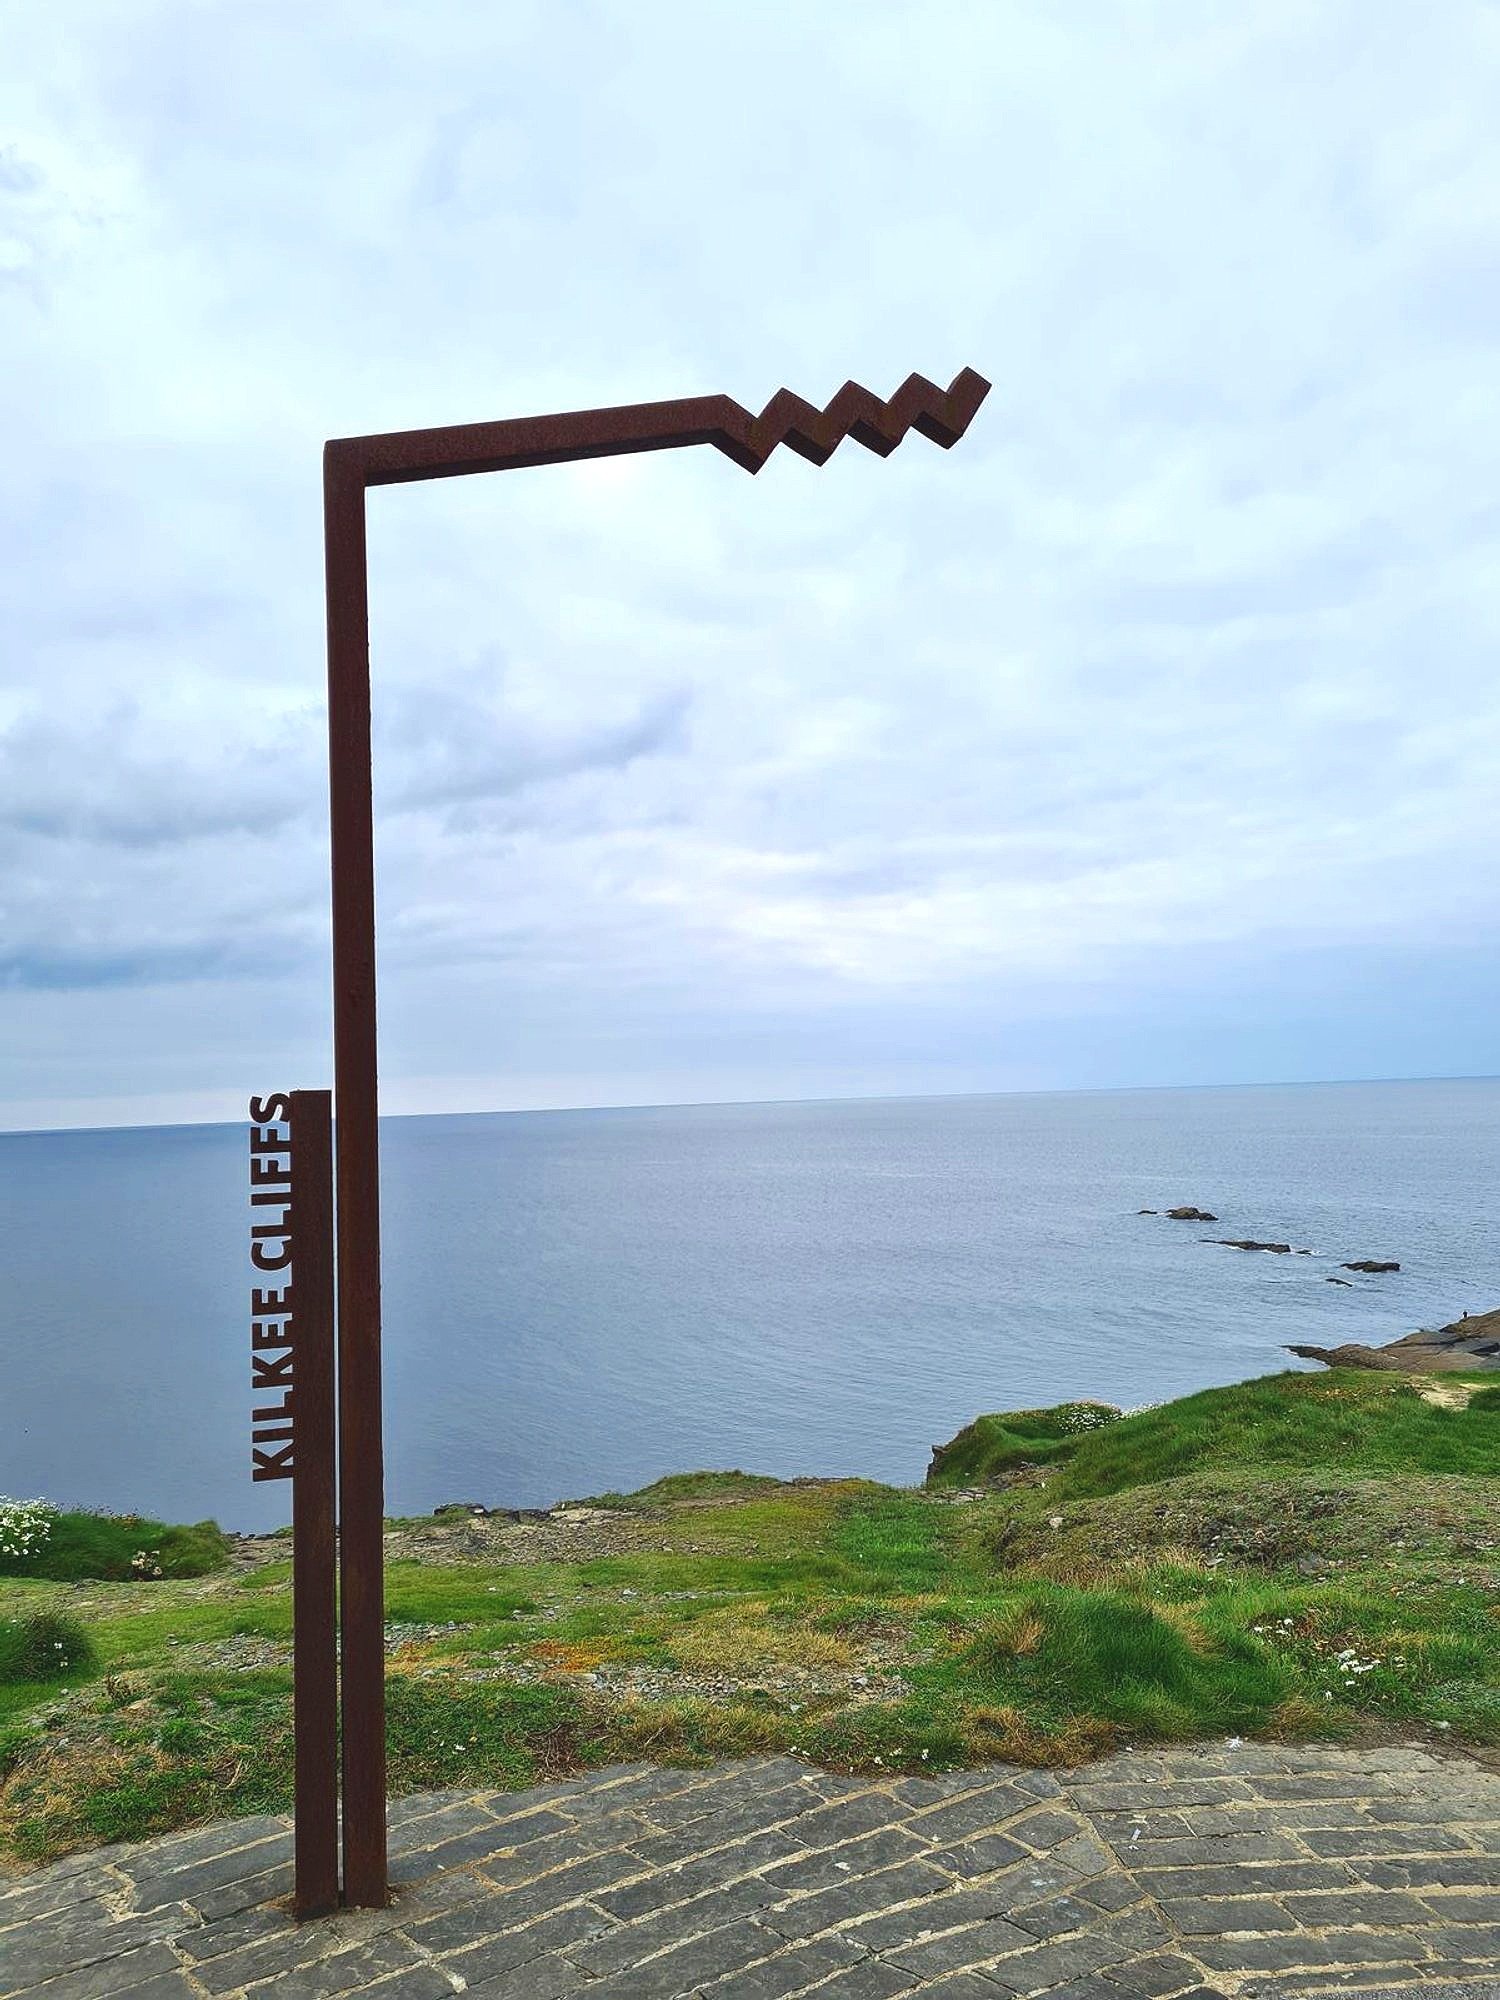 metal pole with zigzag at the top that denotes a wild atlantic way point of interest